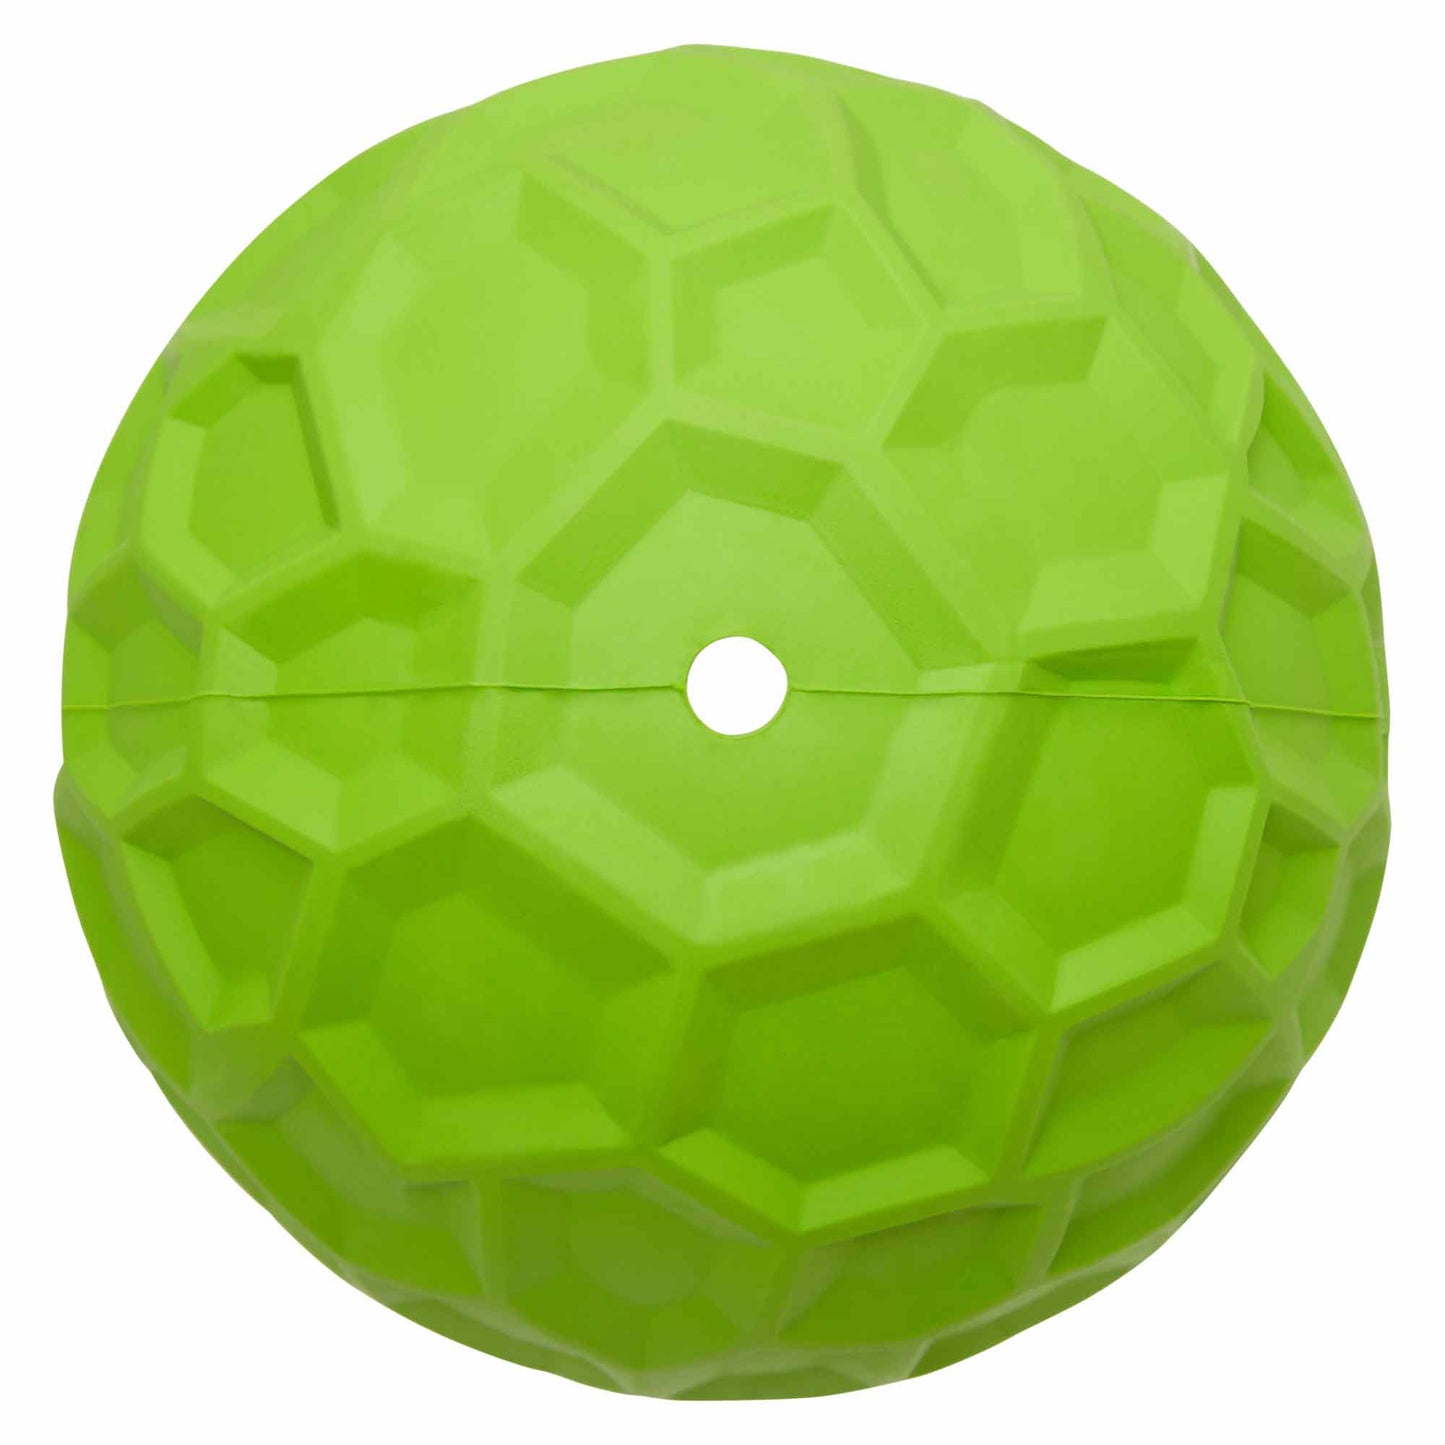 Lexi & Me Rubber Toy Green Dog Treat Ball